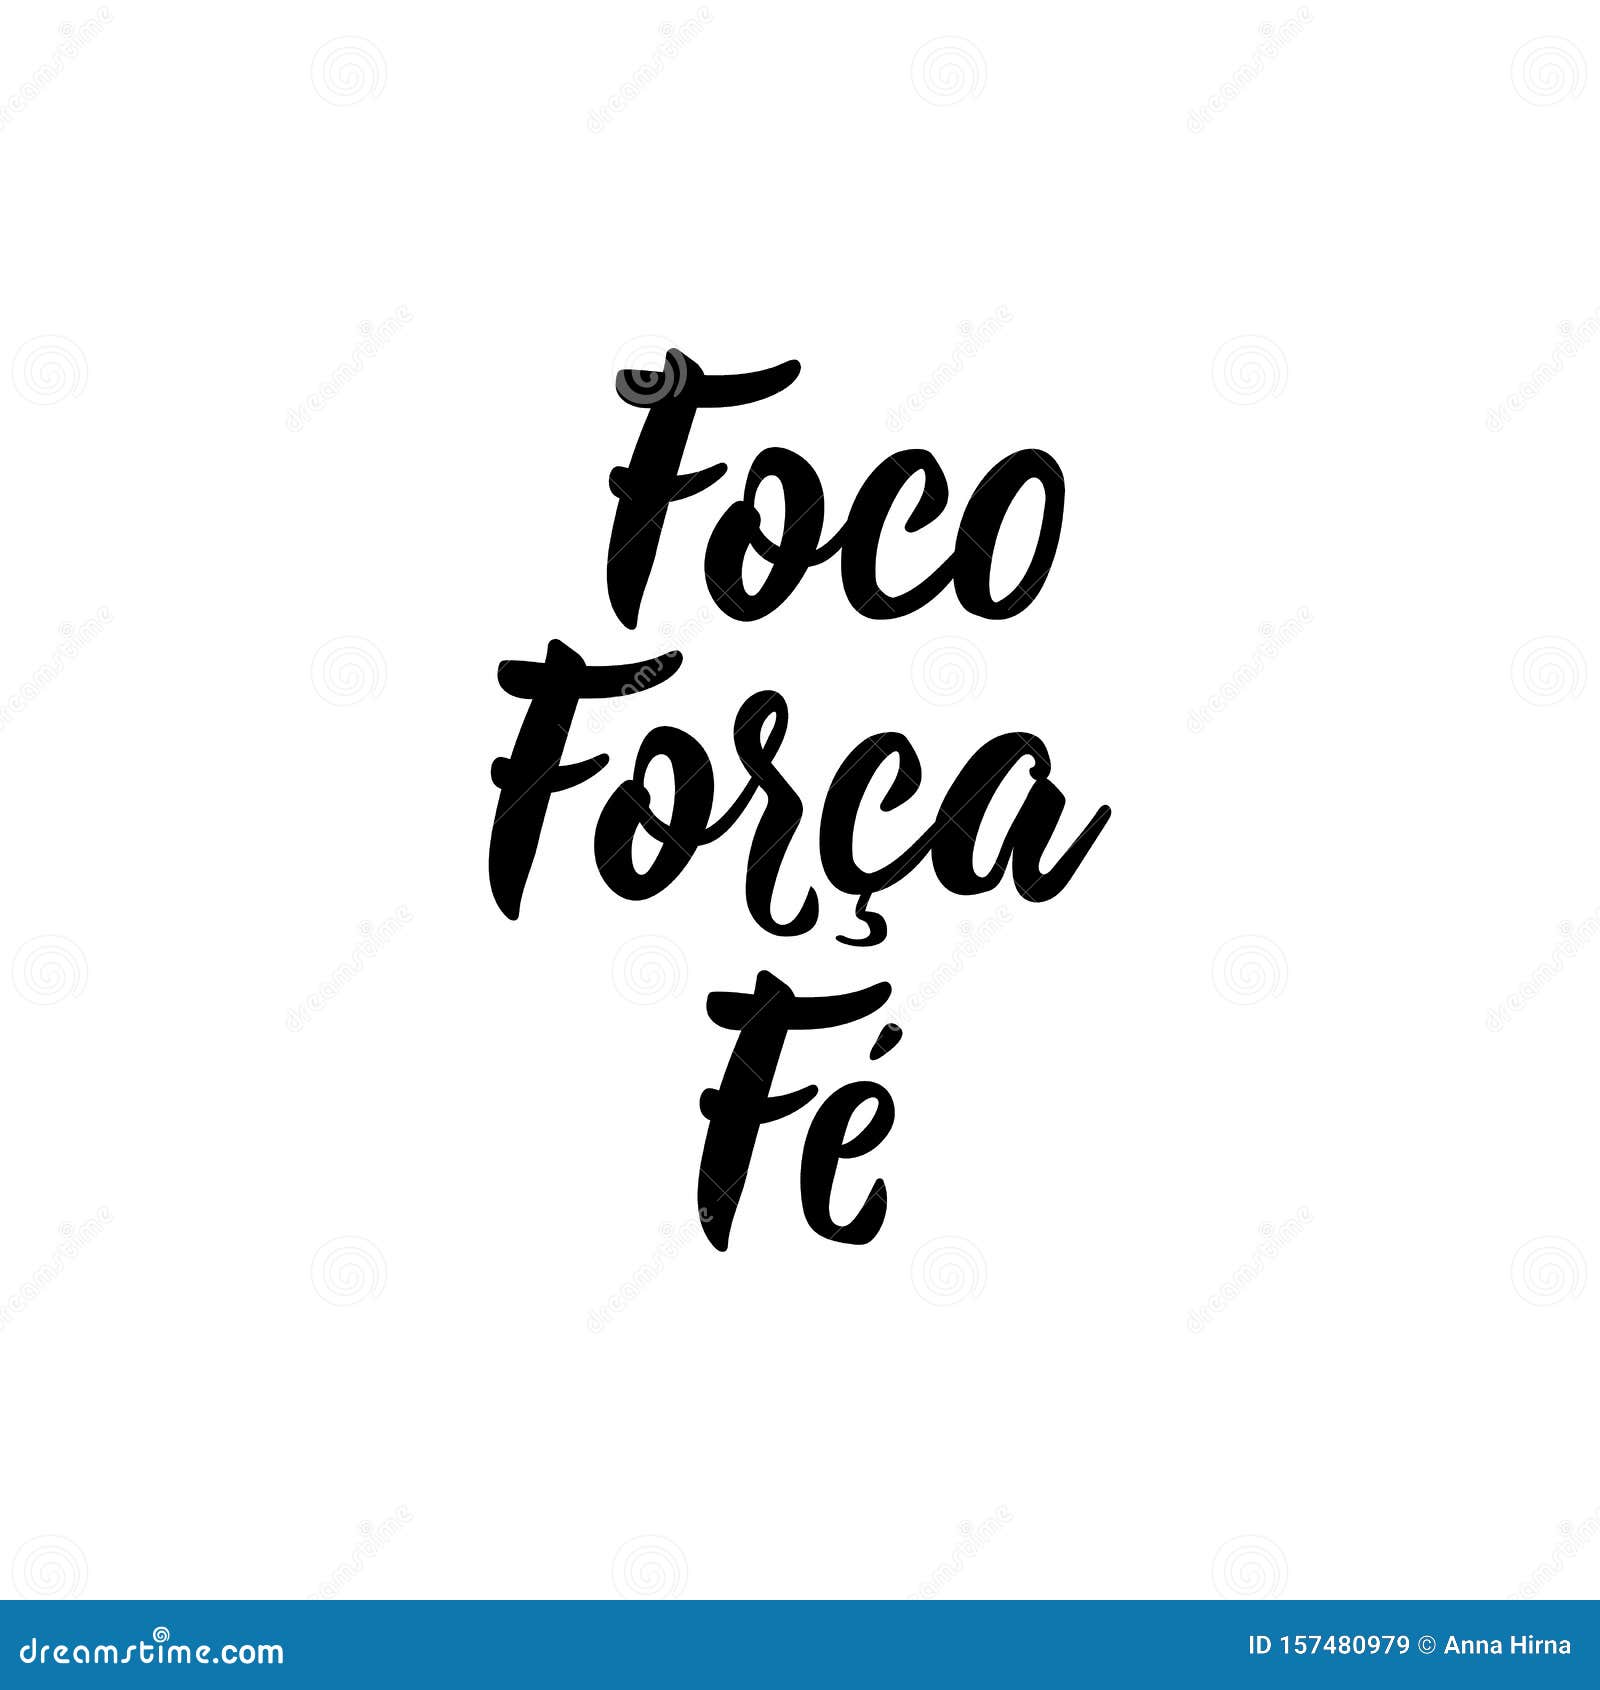 focus strength faith in portuguese. ink  with hand-drawn lettering. foco forca fe